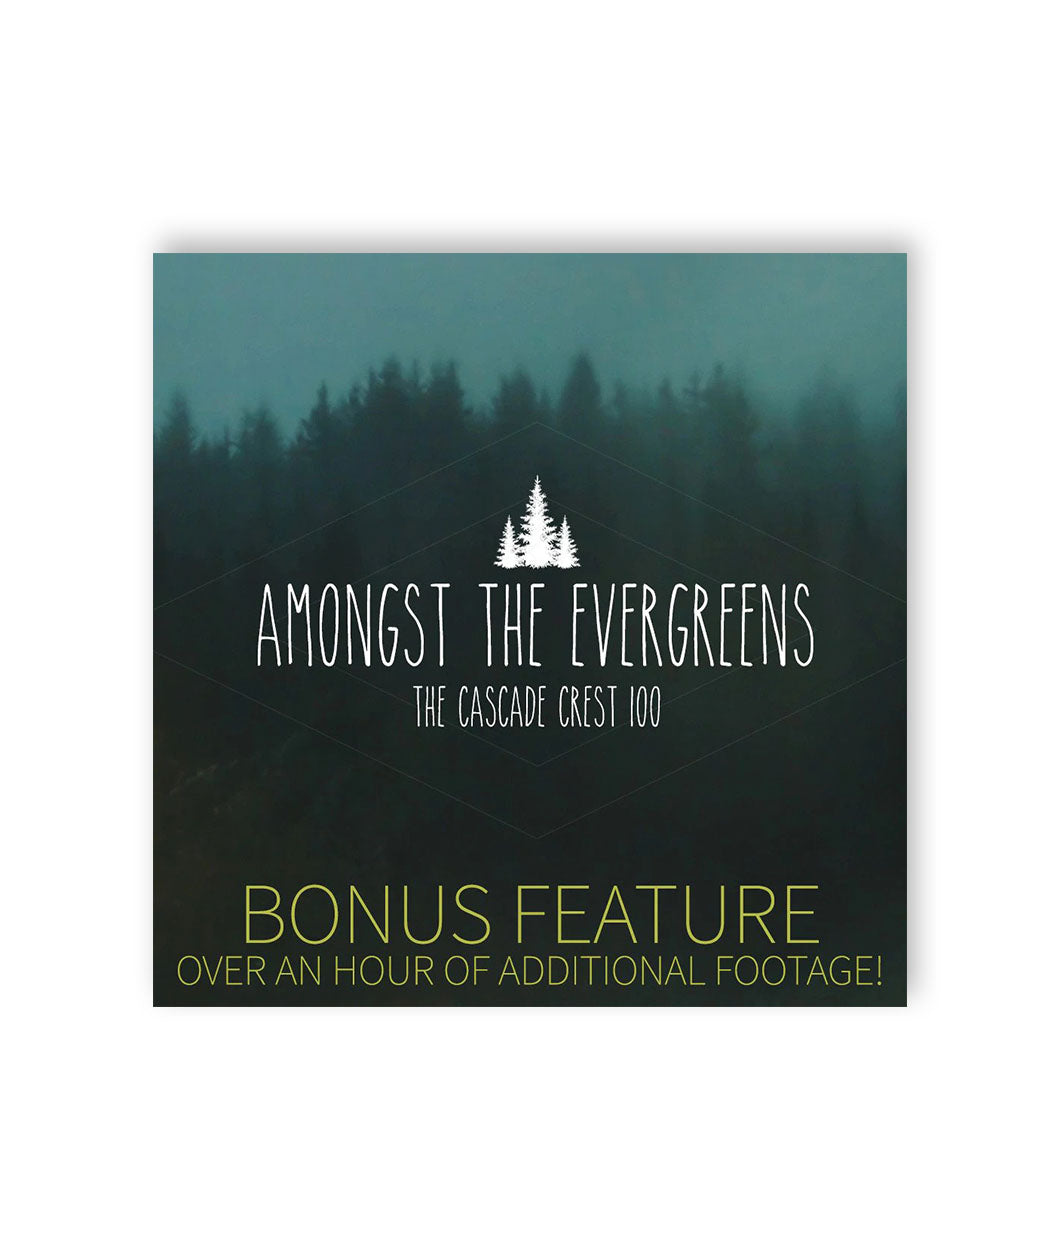 A square image of an out of focus silhouette of a forest. “Amongst the Evergreens The Cascade Crest 100” is written in tall white sans serif font in the center below a silhouette vector image of three white trees. “Bonus Feature Over an hour of additional footage” is on the bottom in dark yellow sans serif font - from The Ginger Runner